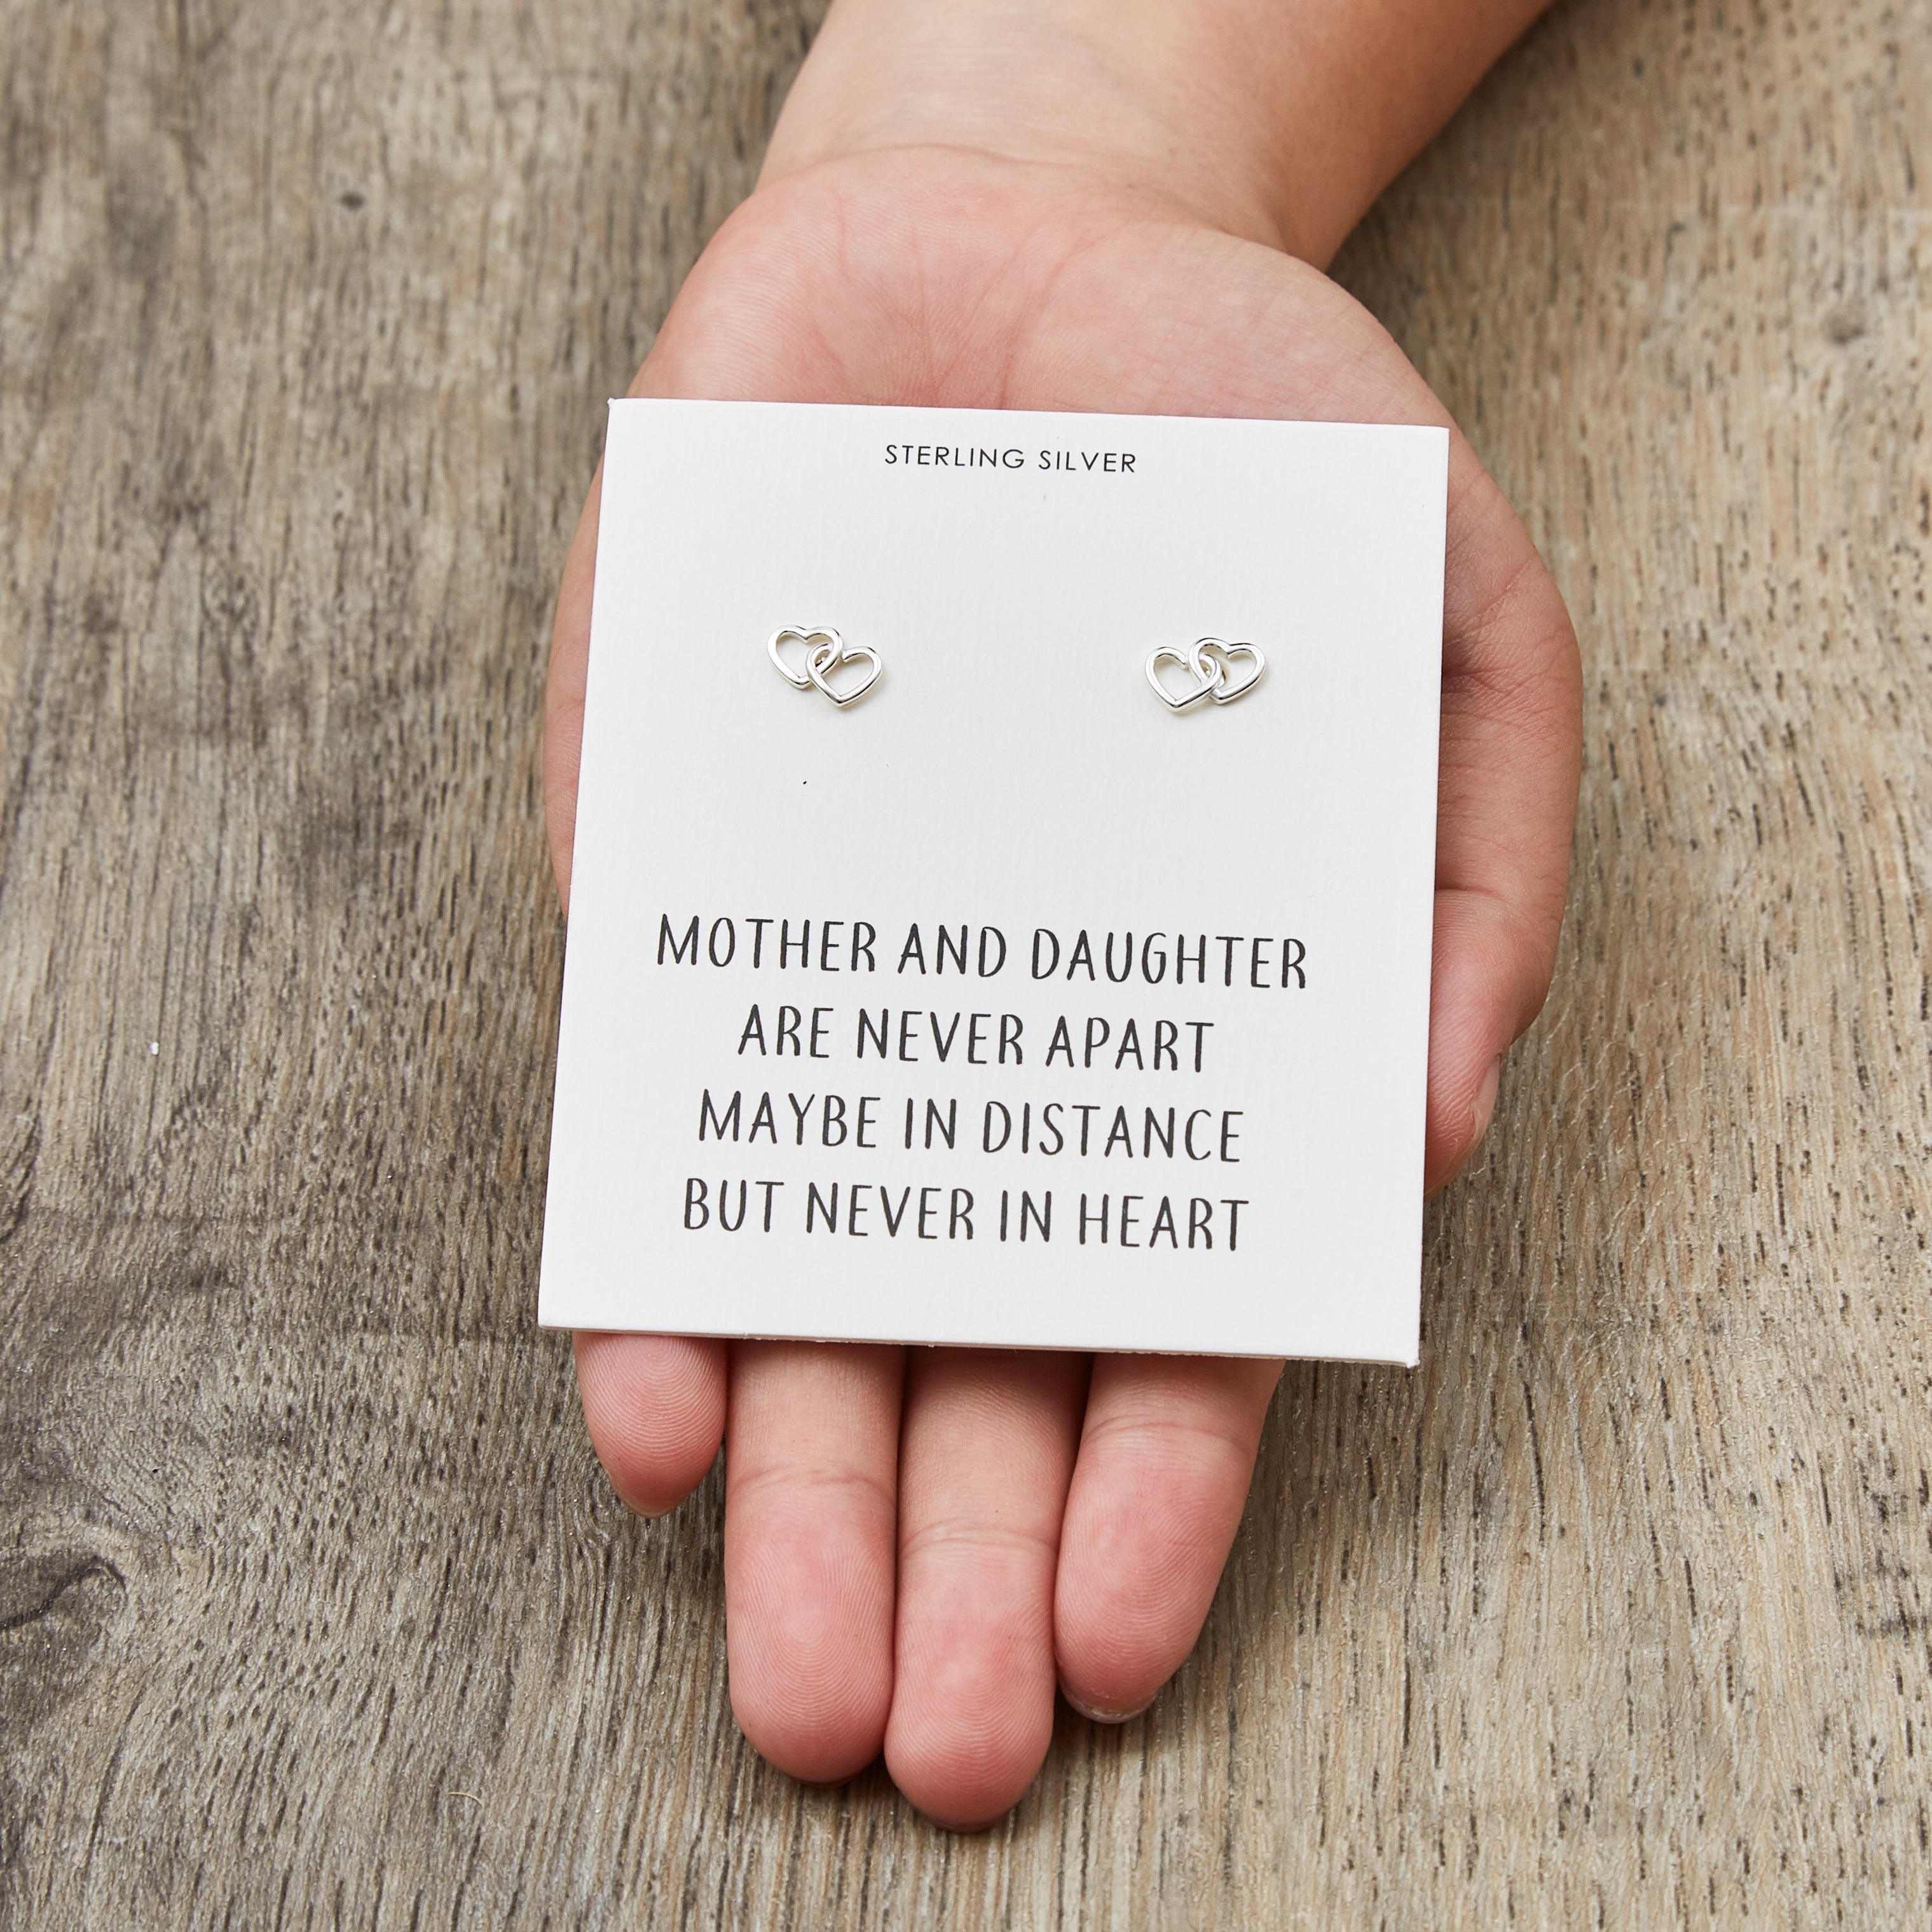 Sterling Silver Mother and Daughter Quote Heart Link Earrings